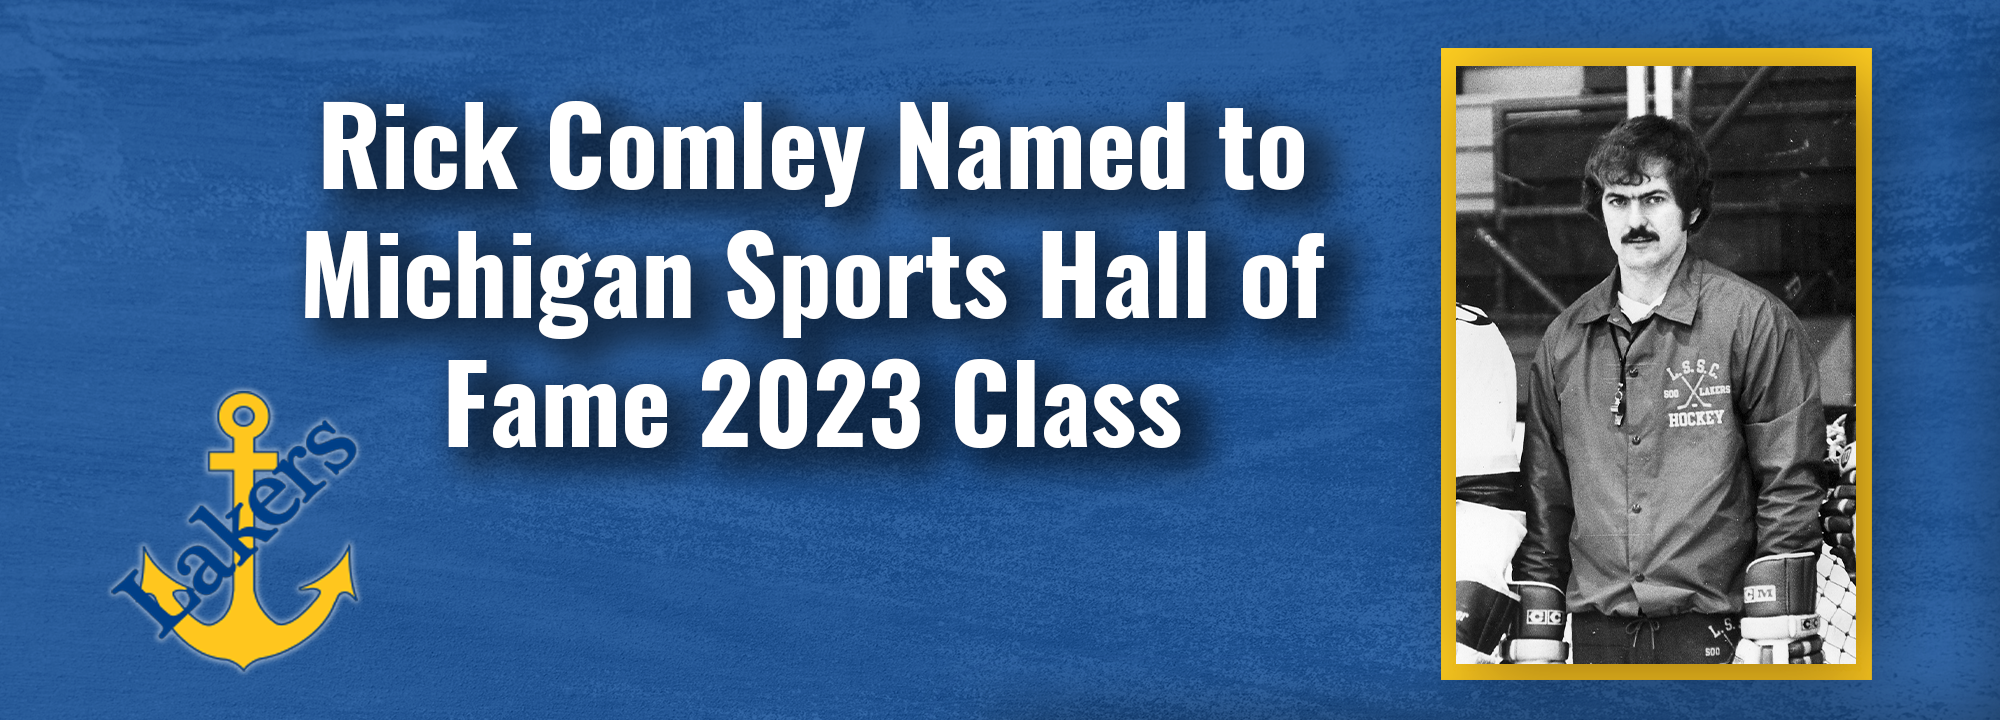 Rick Comly Names to Hall of Fame 2023 Class